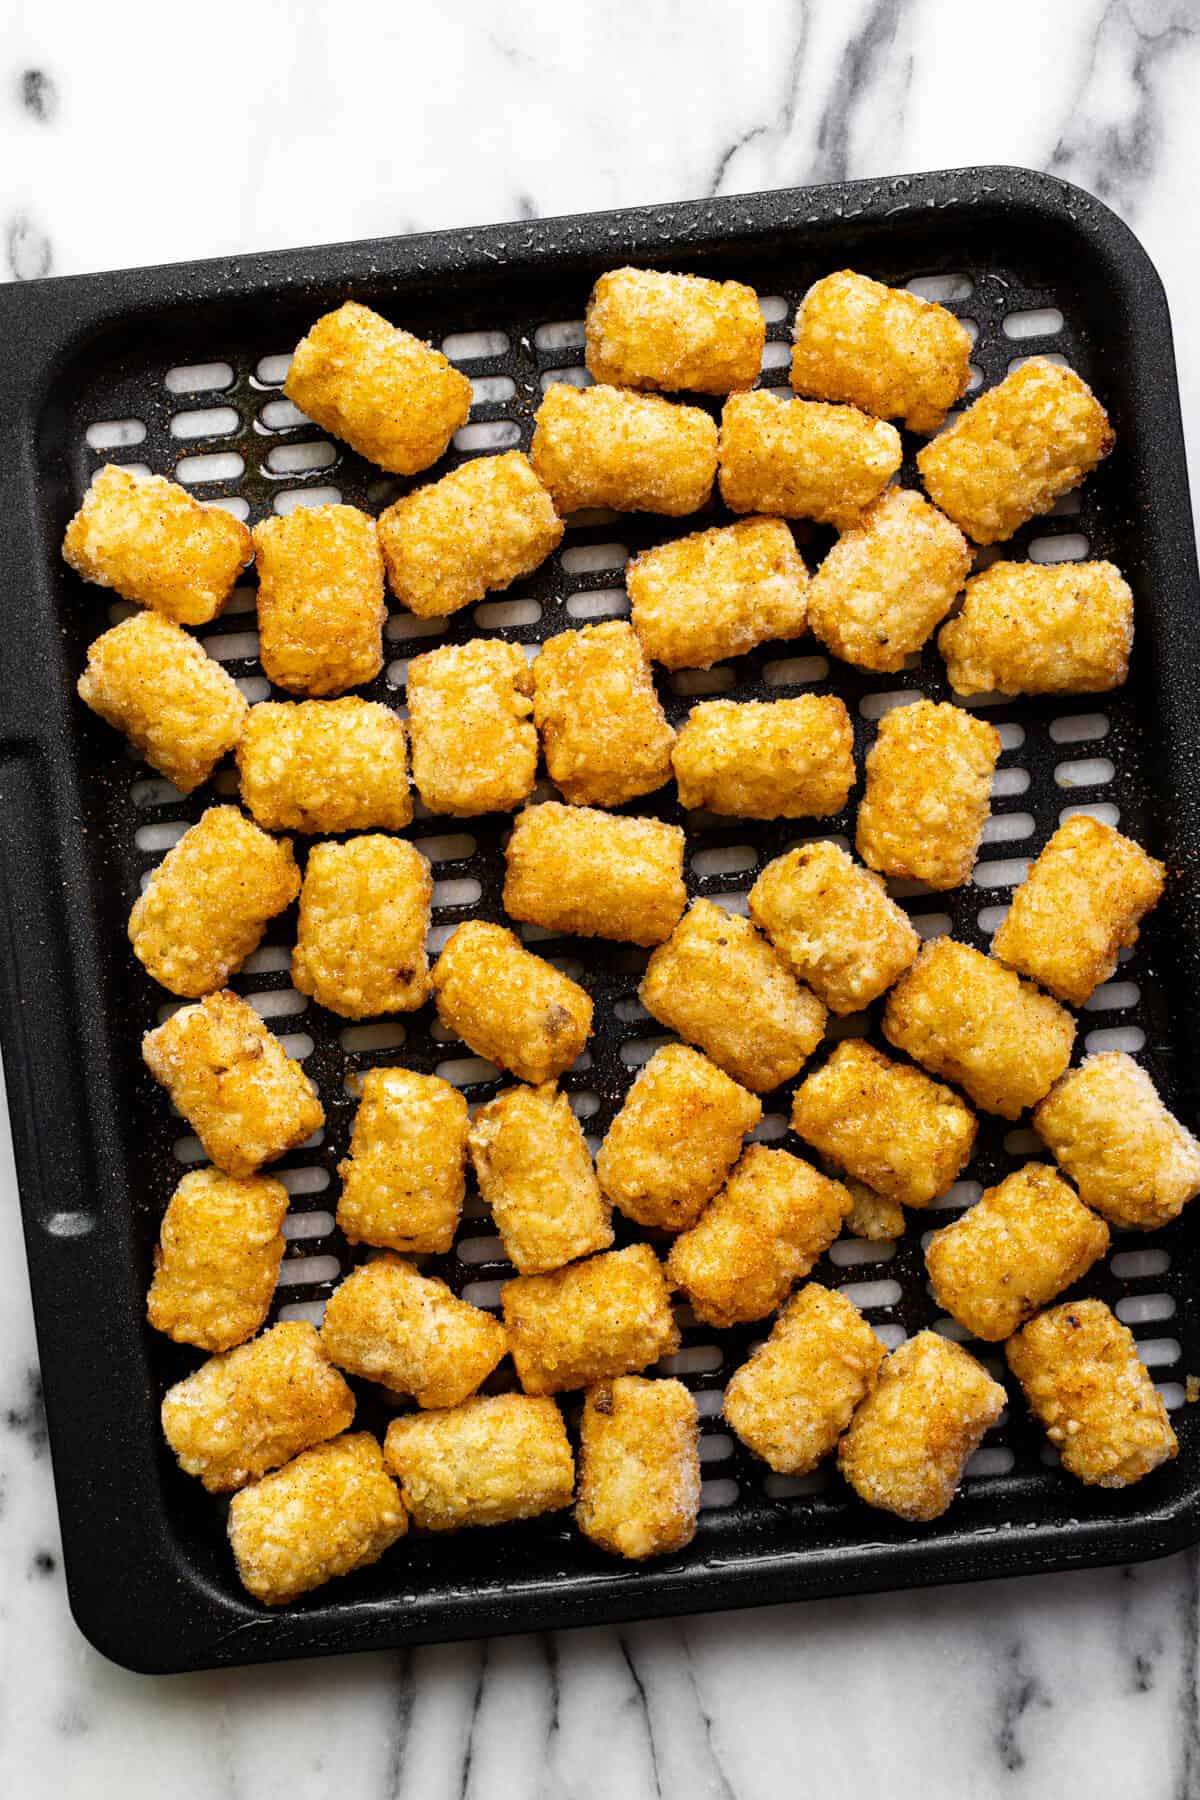 Black air fryer tray with frozen tater tots on it.